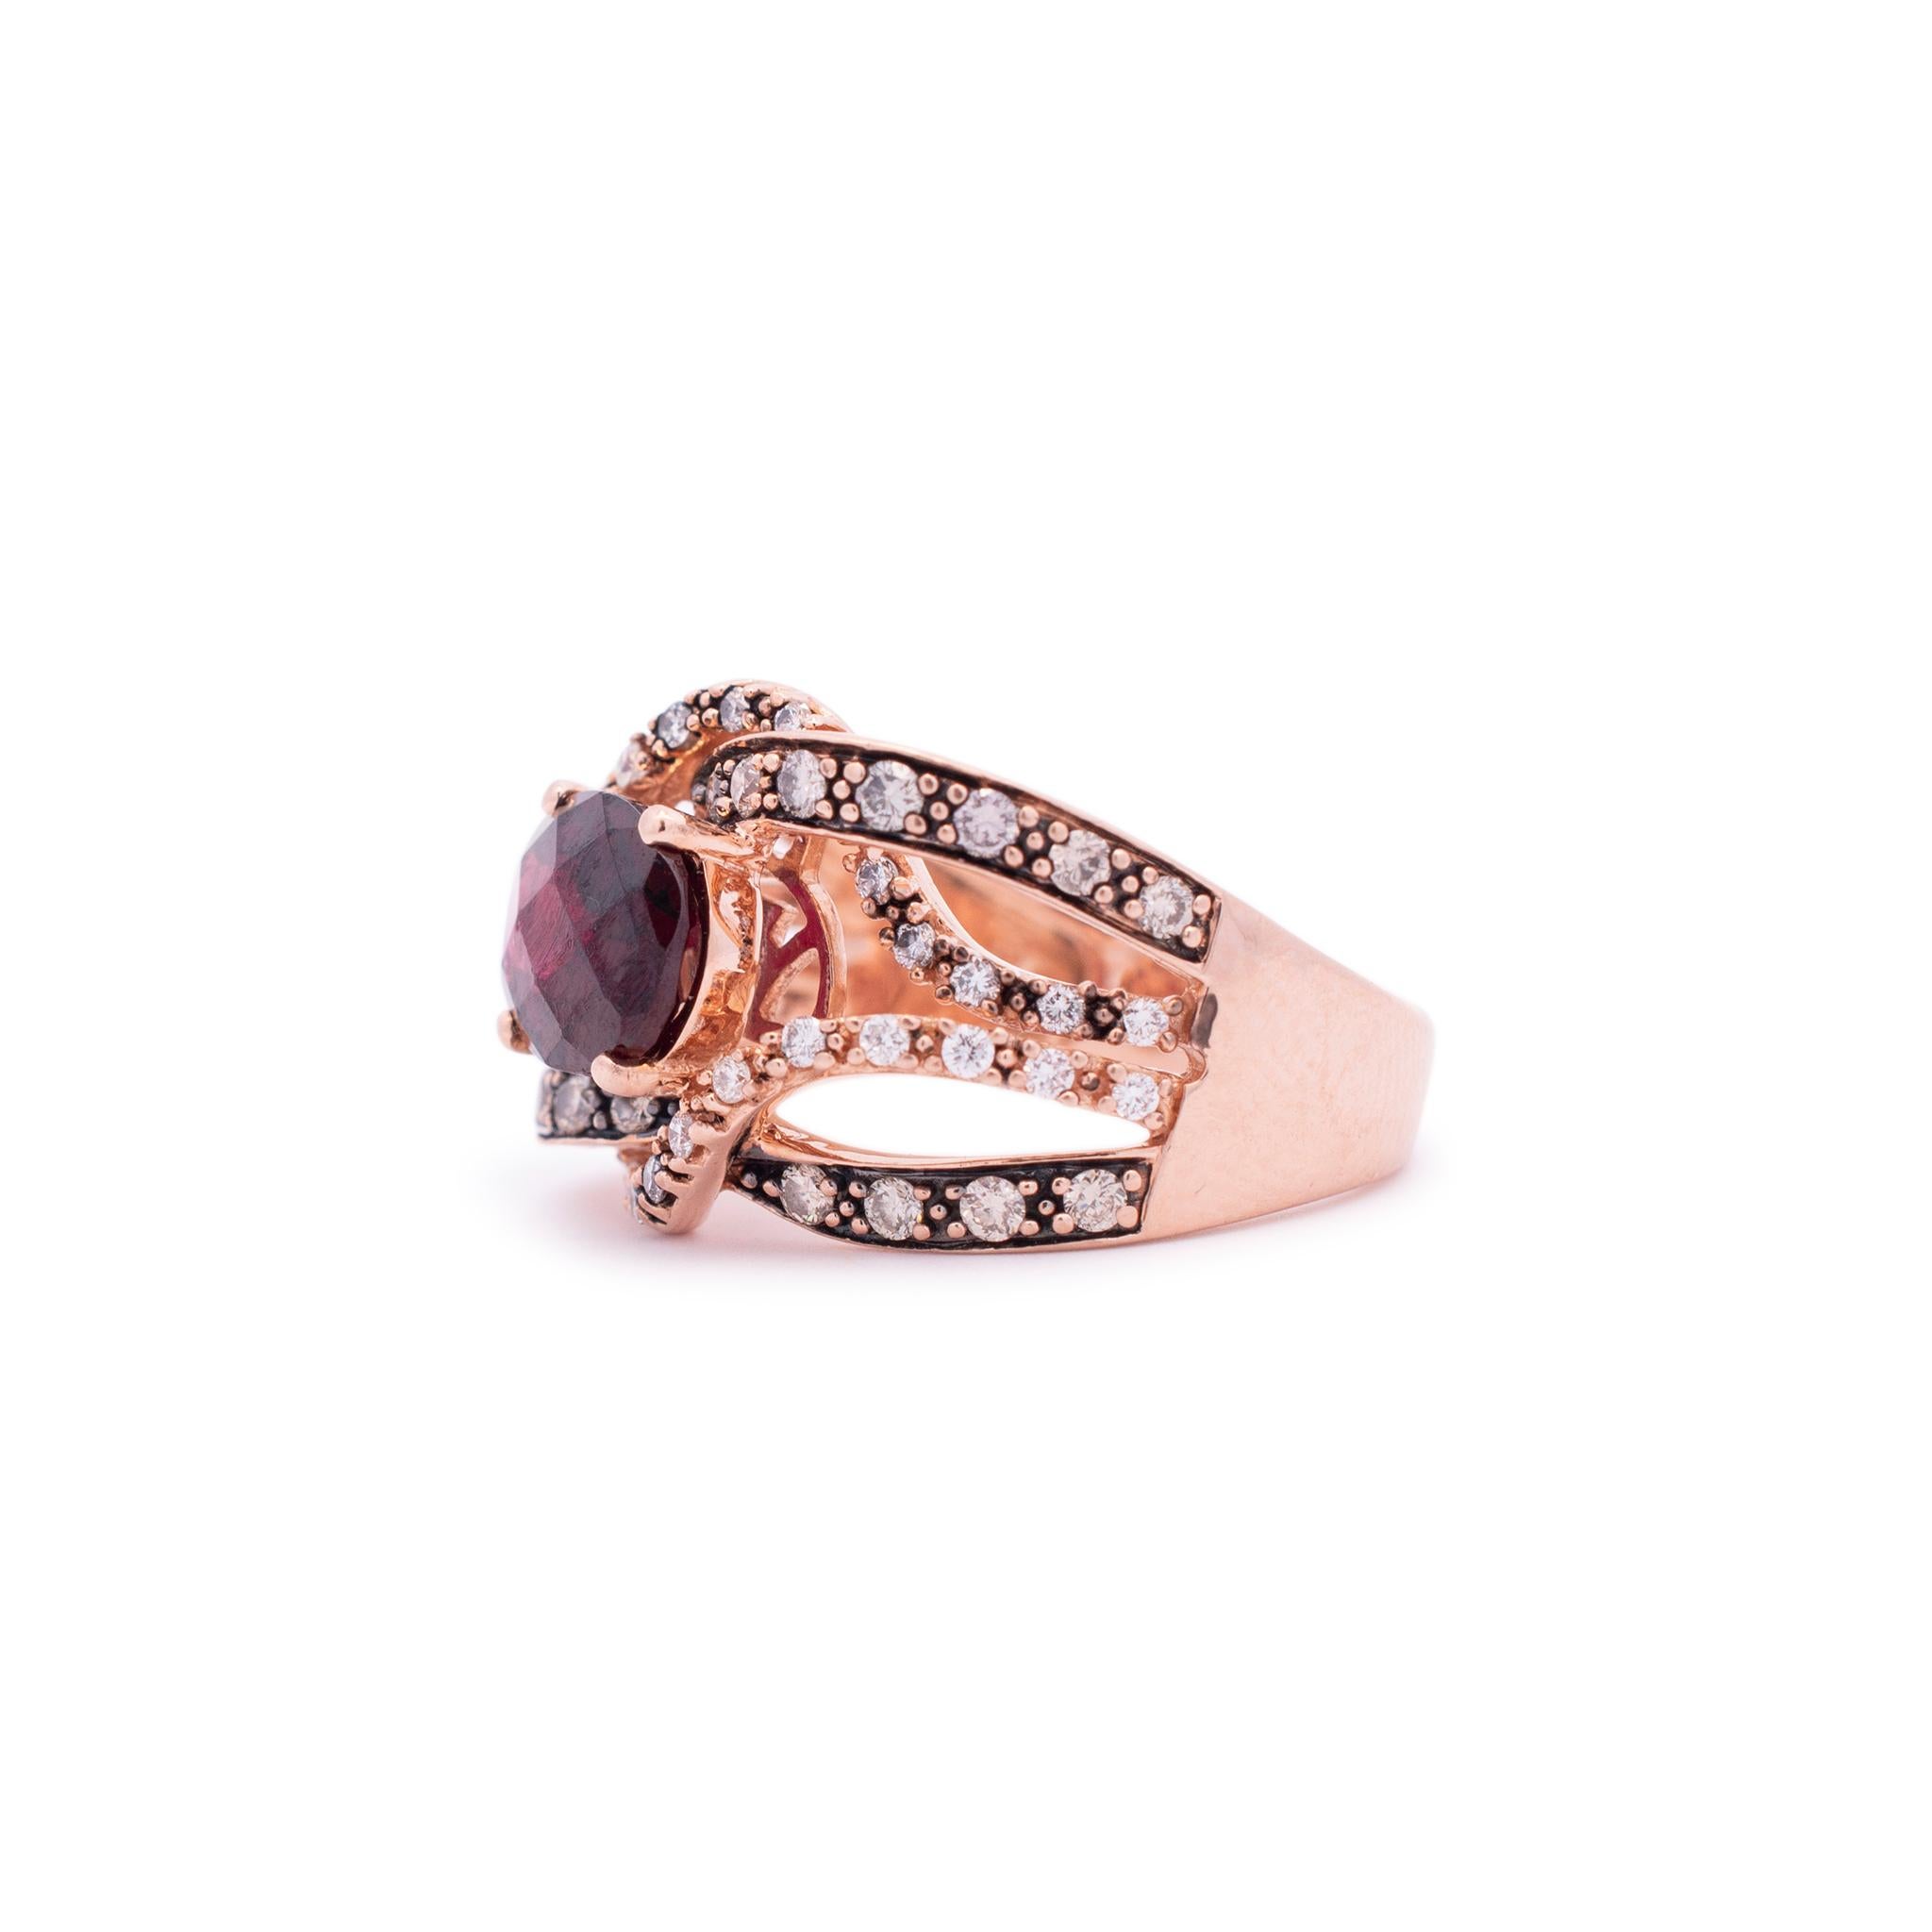 Ladies Le Vian 14K Rose Gold Oval Garnet & Diamond Cocktail Ring In Excellent Condition For Sale In Houston, TX